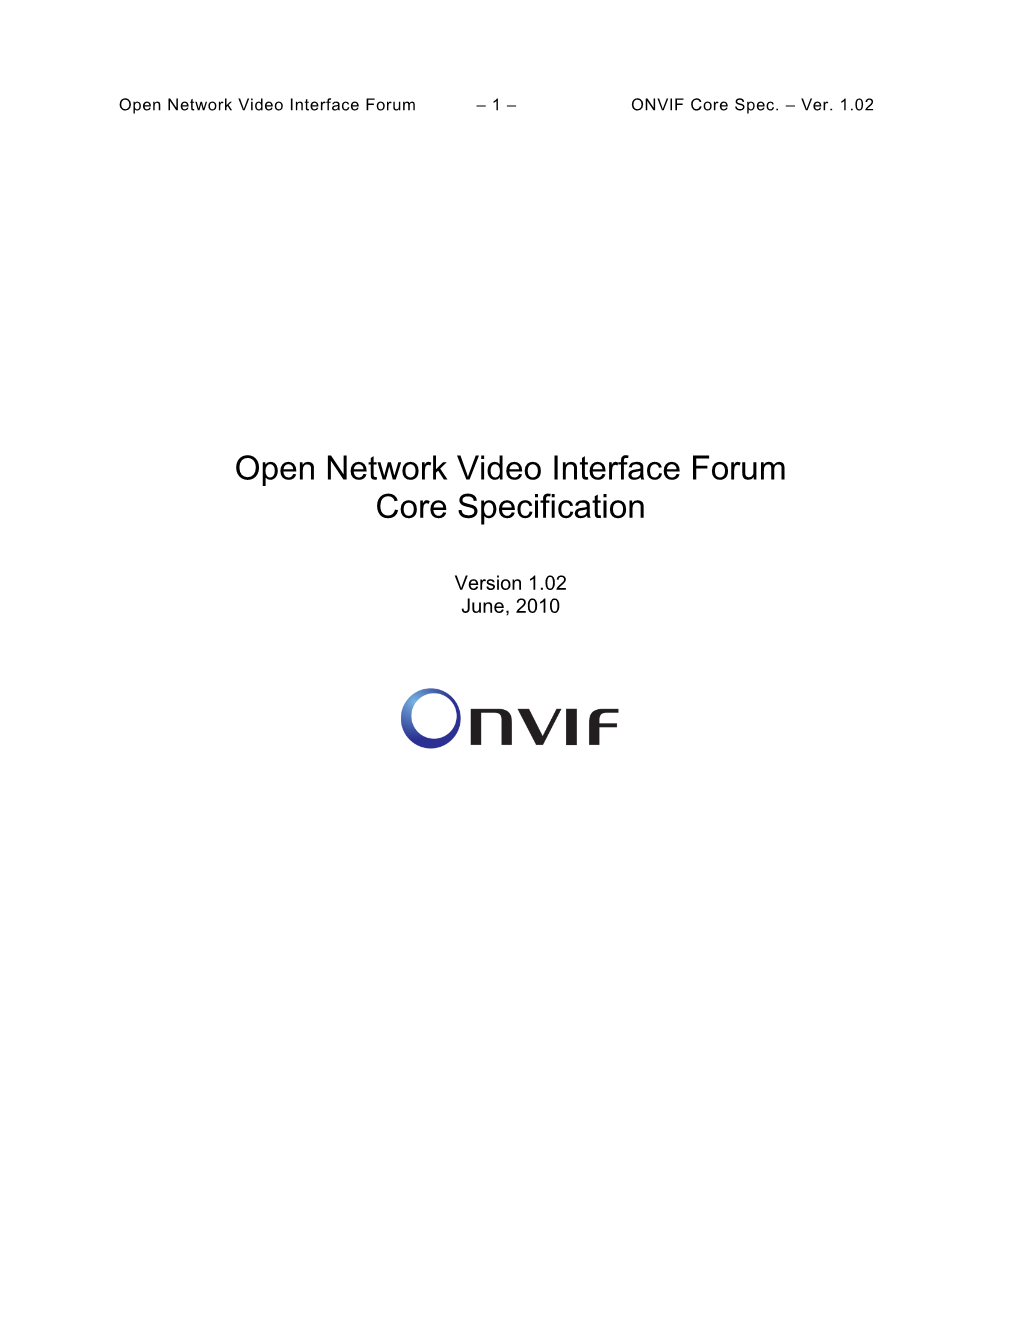 ONVIF Core Specification